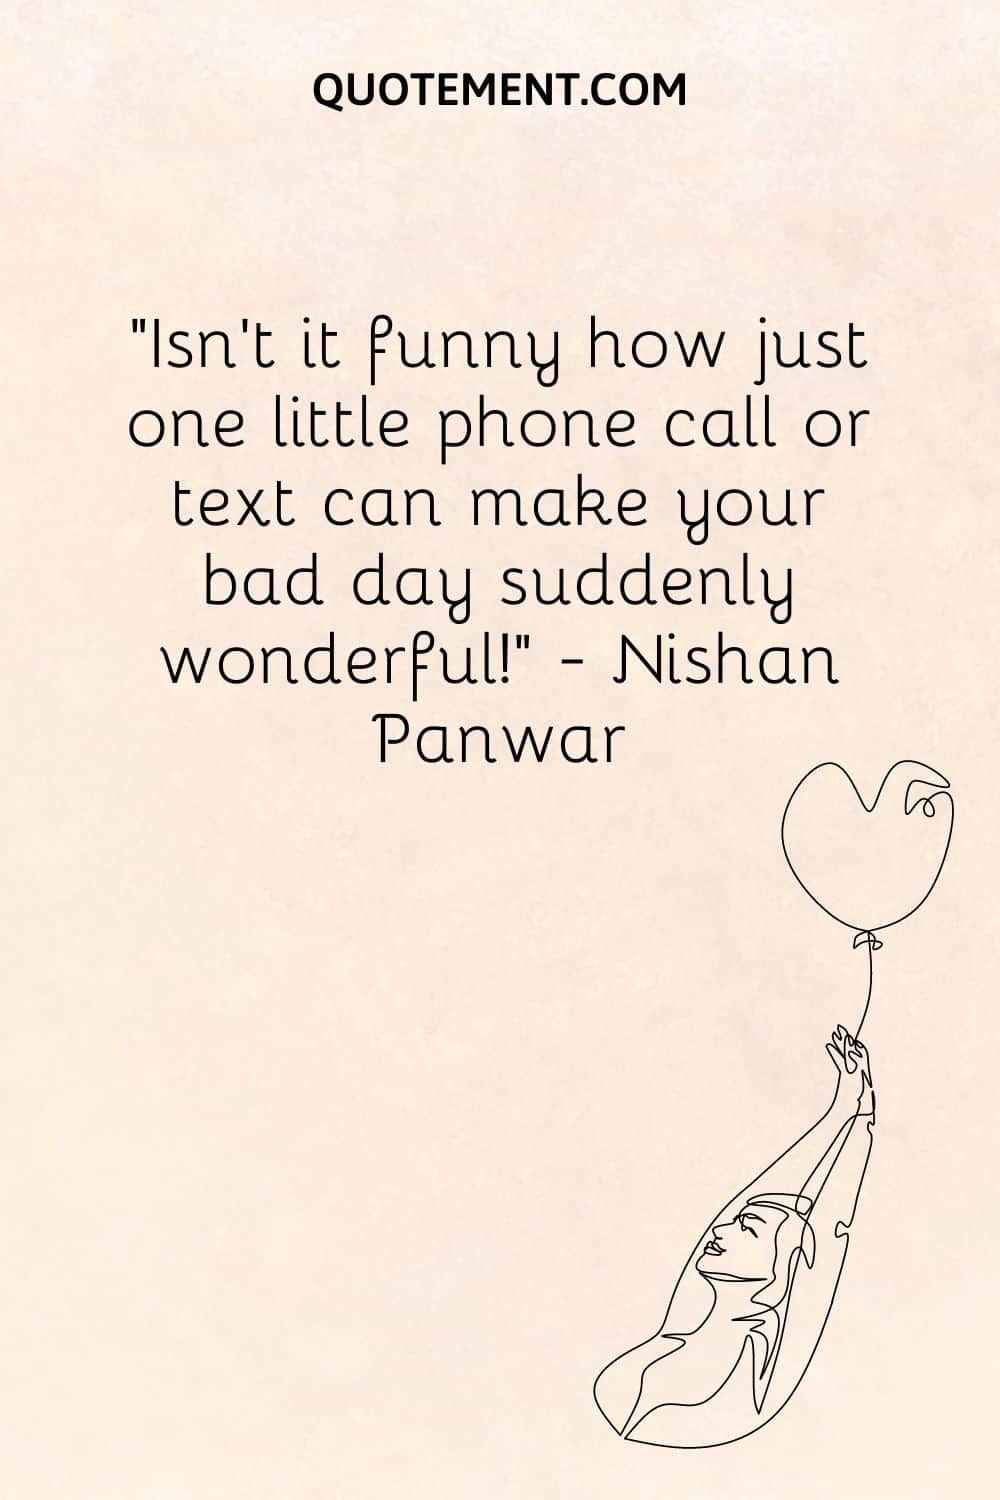 Isn’t it funny how just one little phone call or text can make your bad day suddenly wonderful!